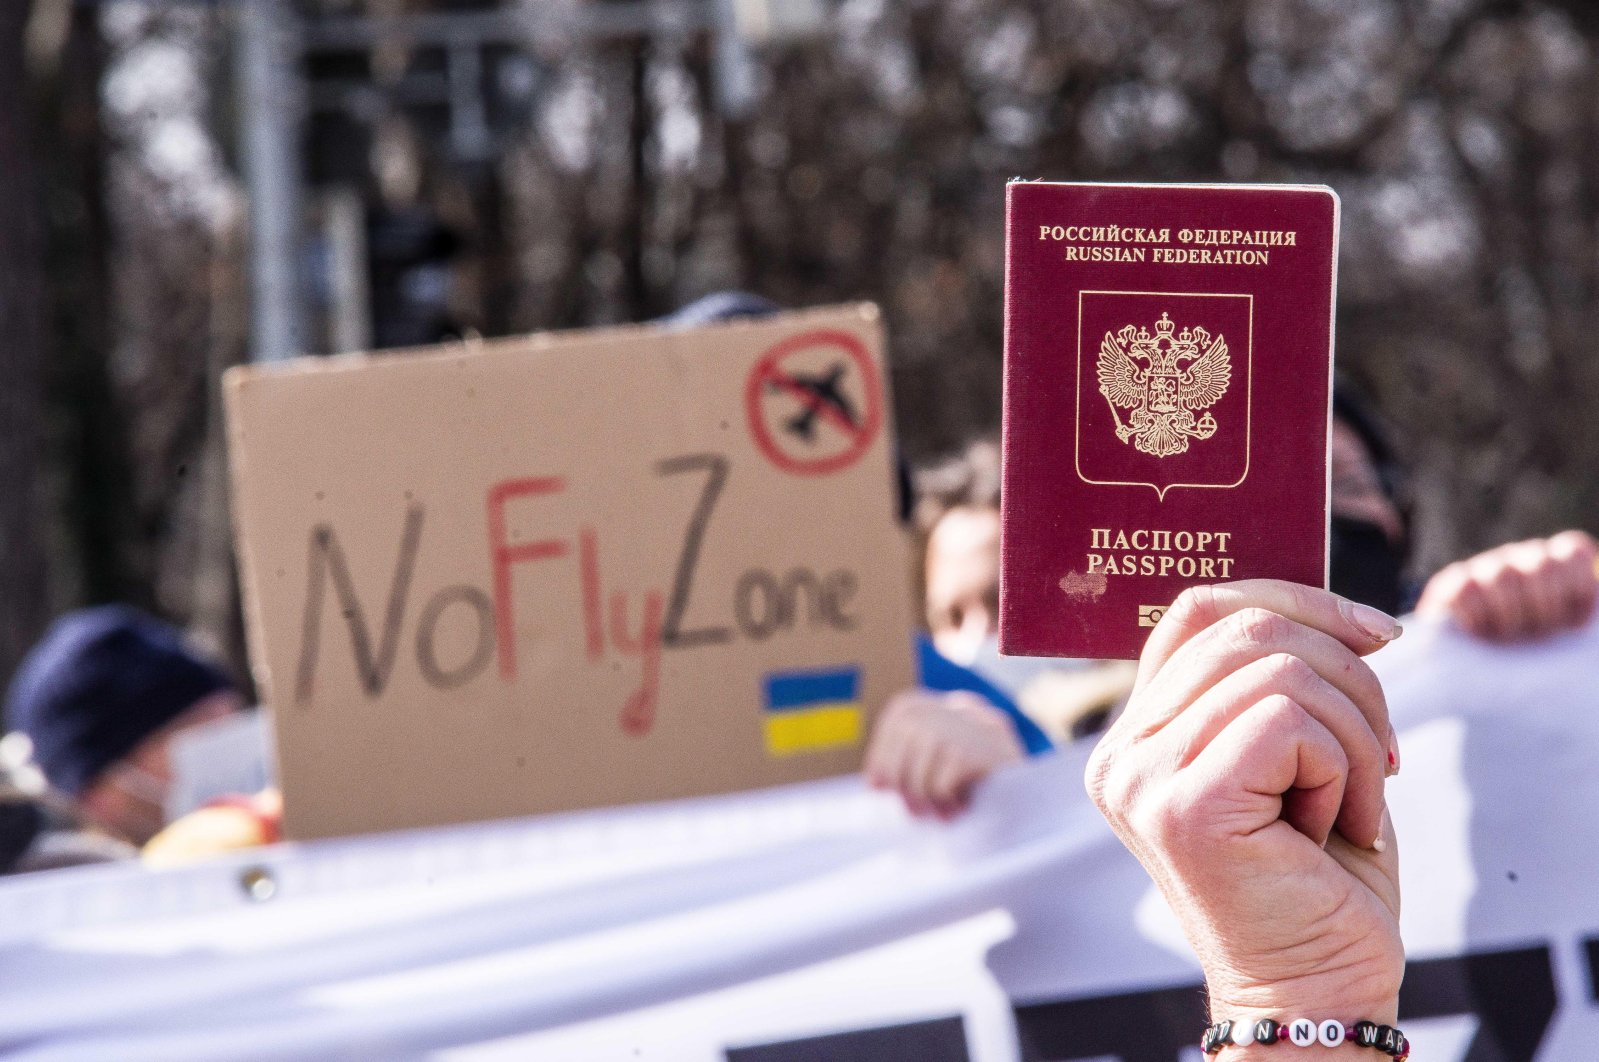 Russian citizen Irina Revina Hofmann (R) holds up her Russian passport during a demonstration against the war in Ukraine to ask for forgiveness and express not all Russians are part of the Kremlin&#039;s war and authoritarianism, Munich, Germany, March 5, 2022. (ZUMA Press Wire via Reuters)